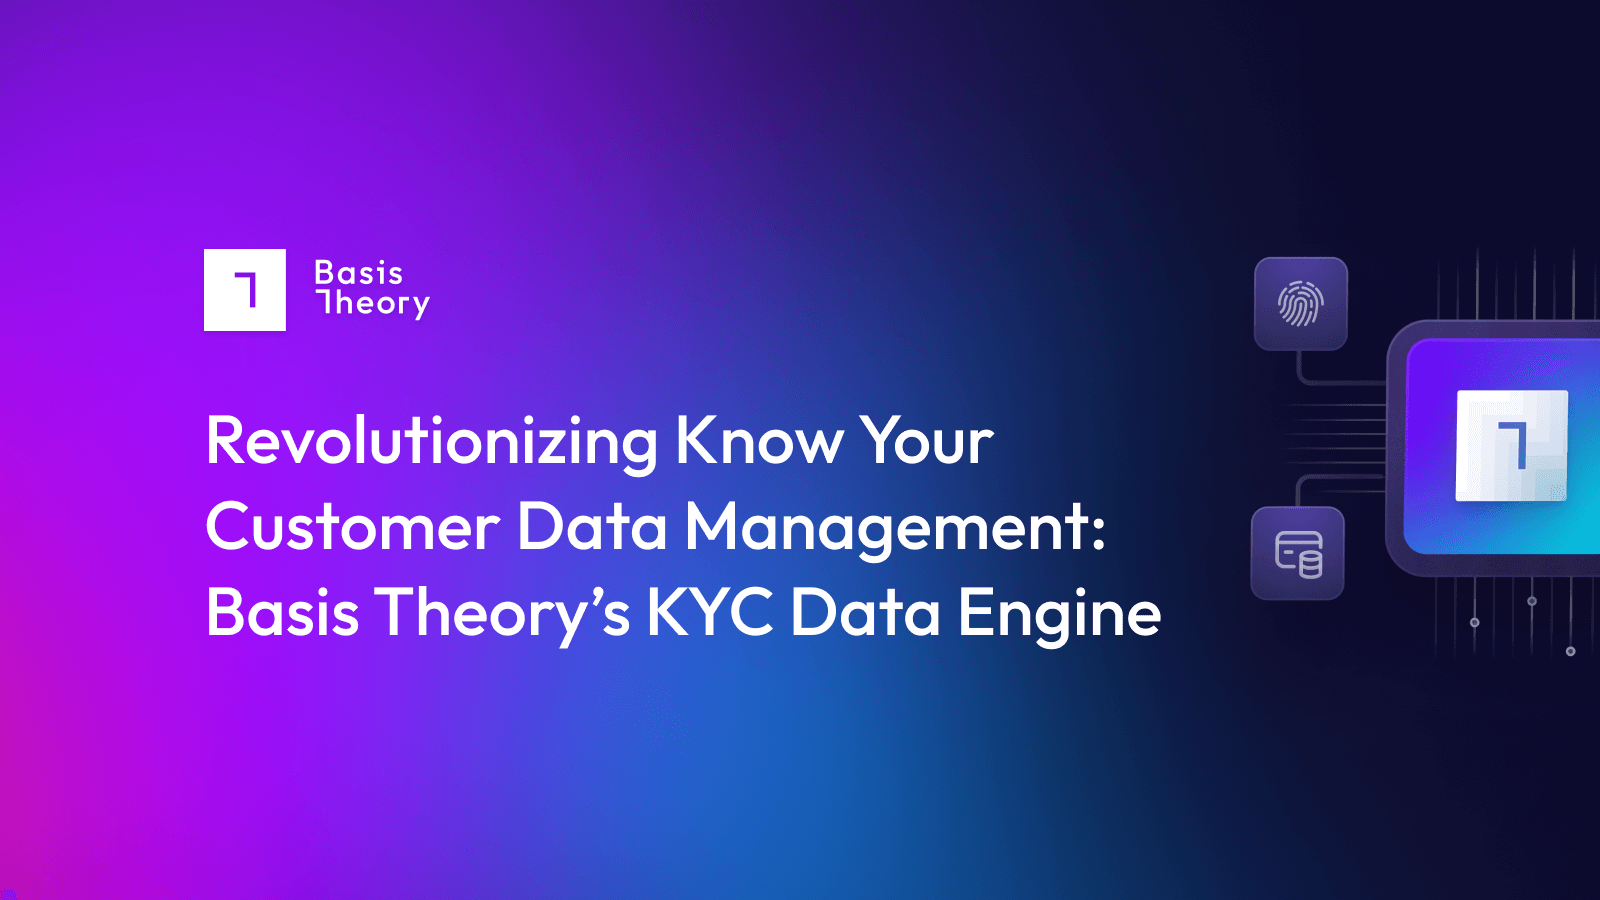 KYC data management with Basis Theory